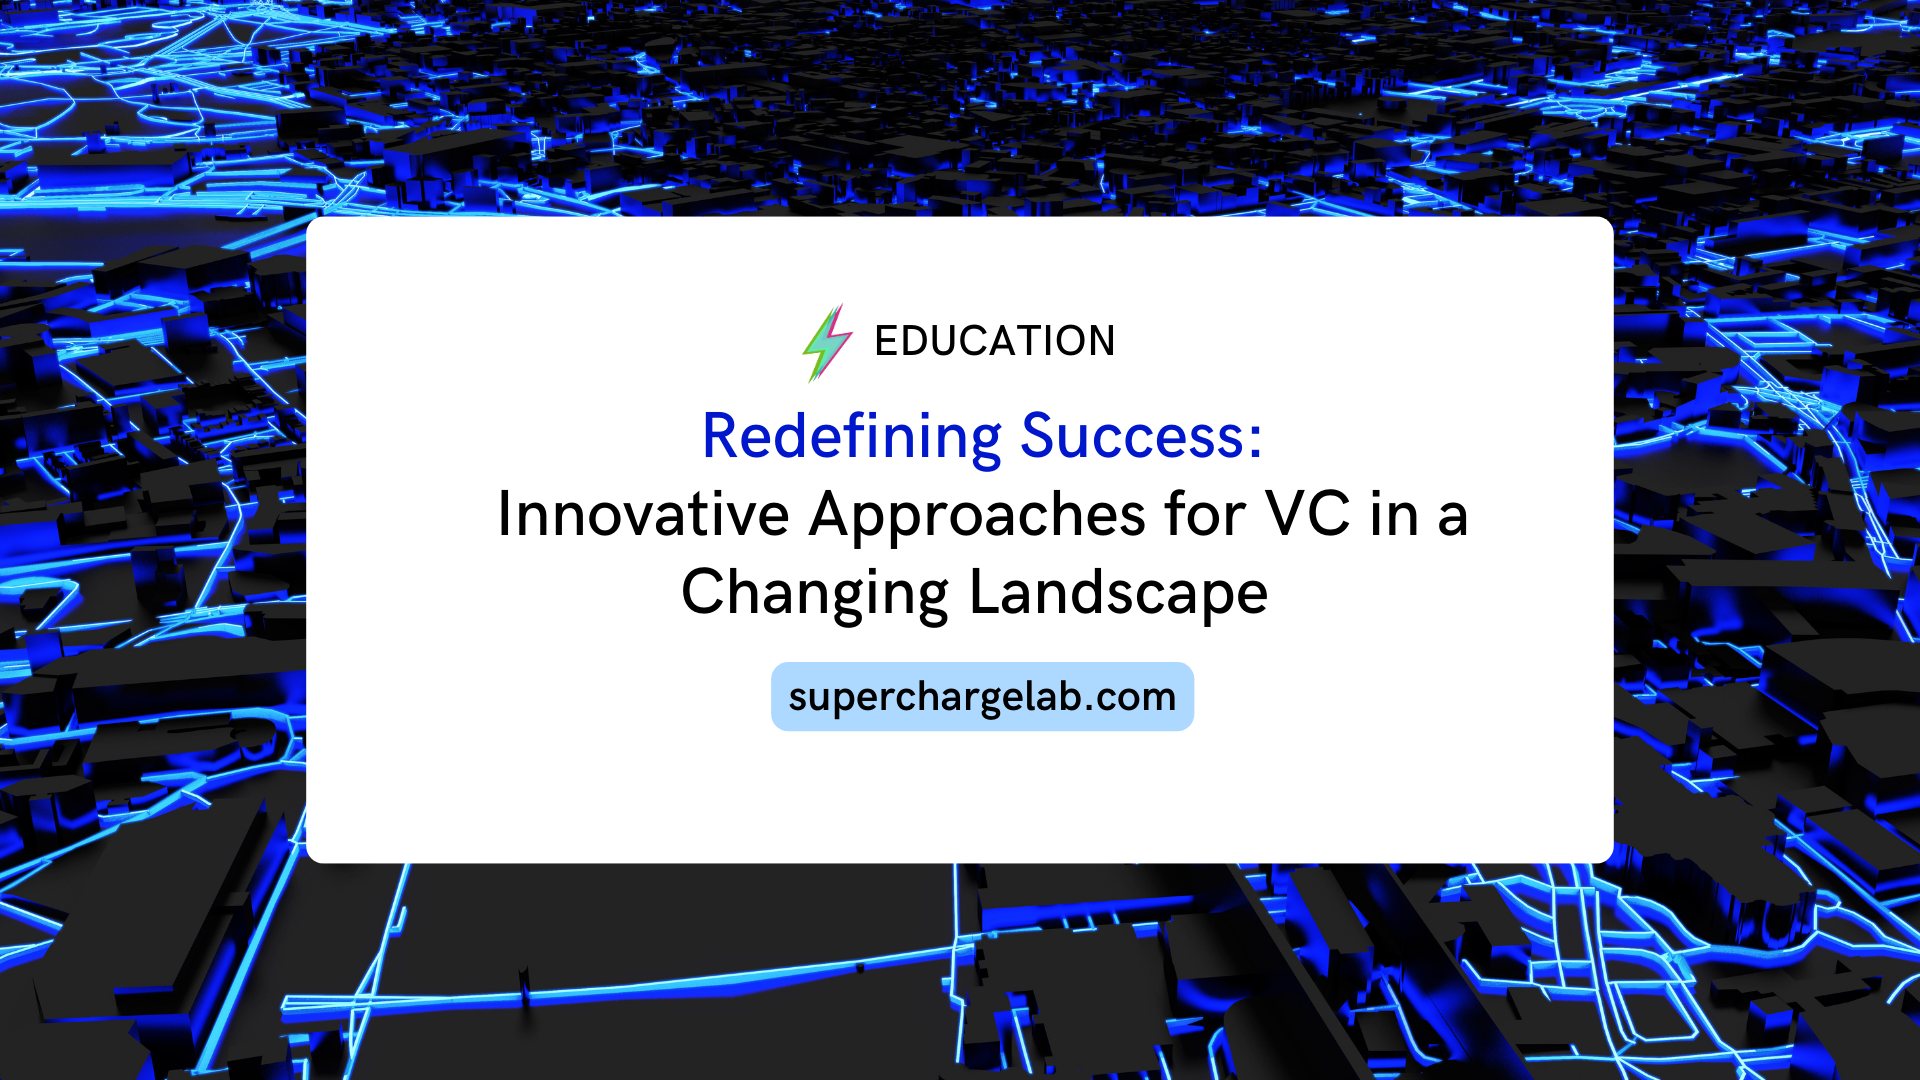 Redefining Success: Innovative Approaches for VC’s in a Changing Landscape